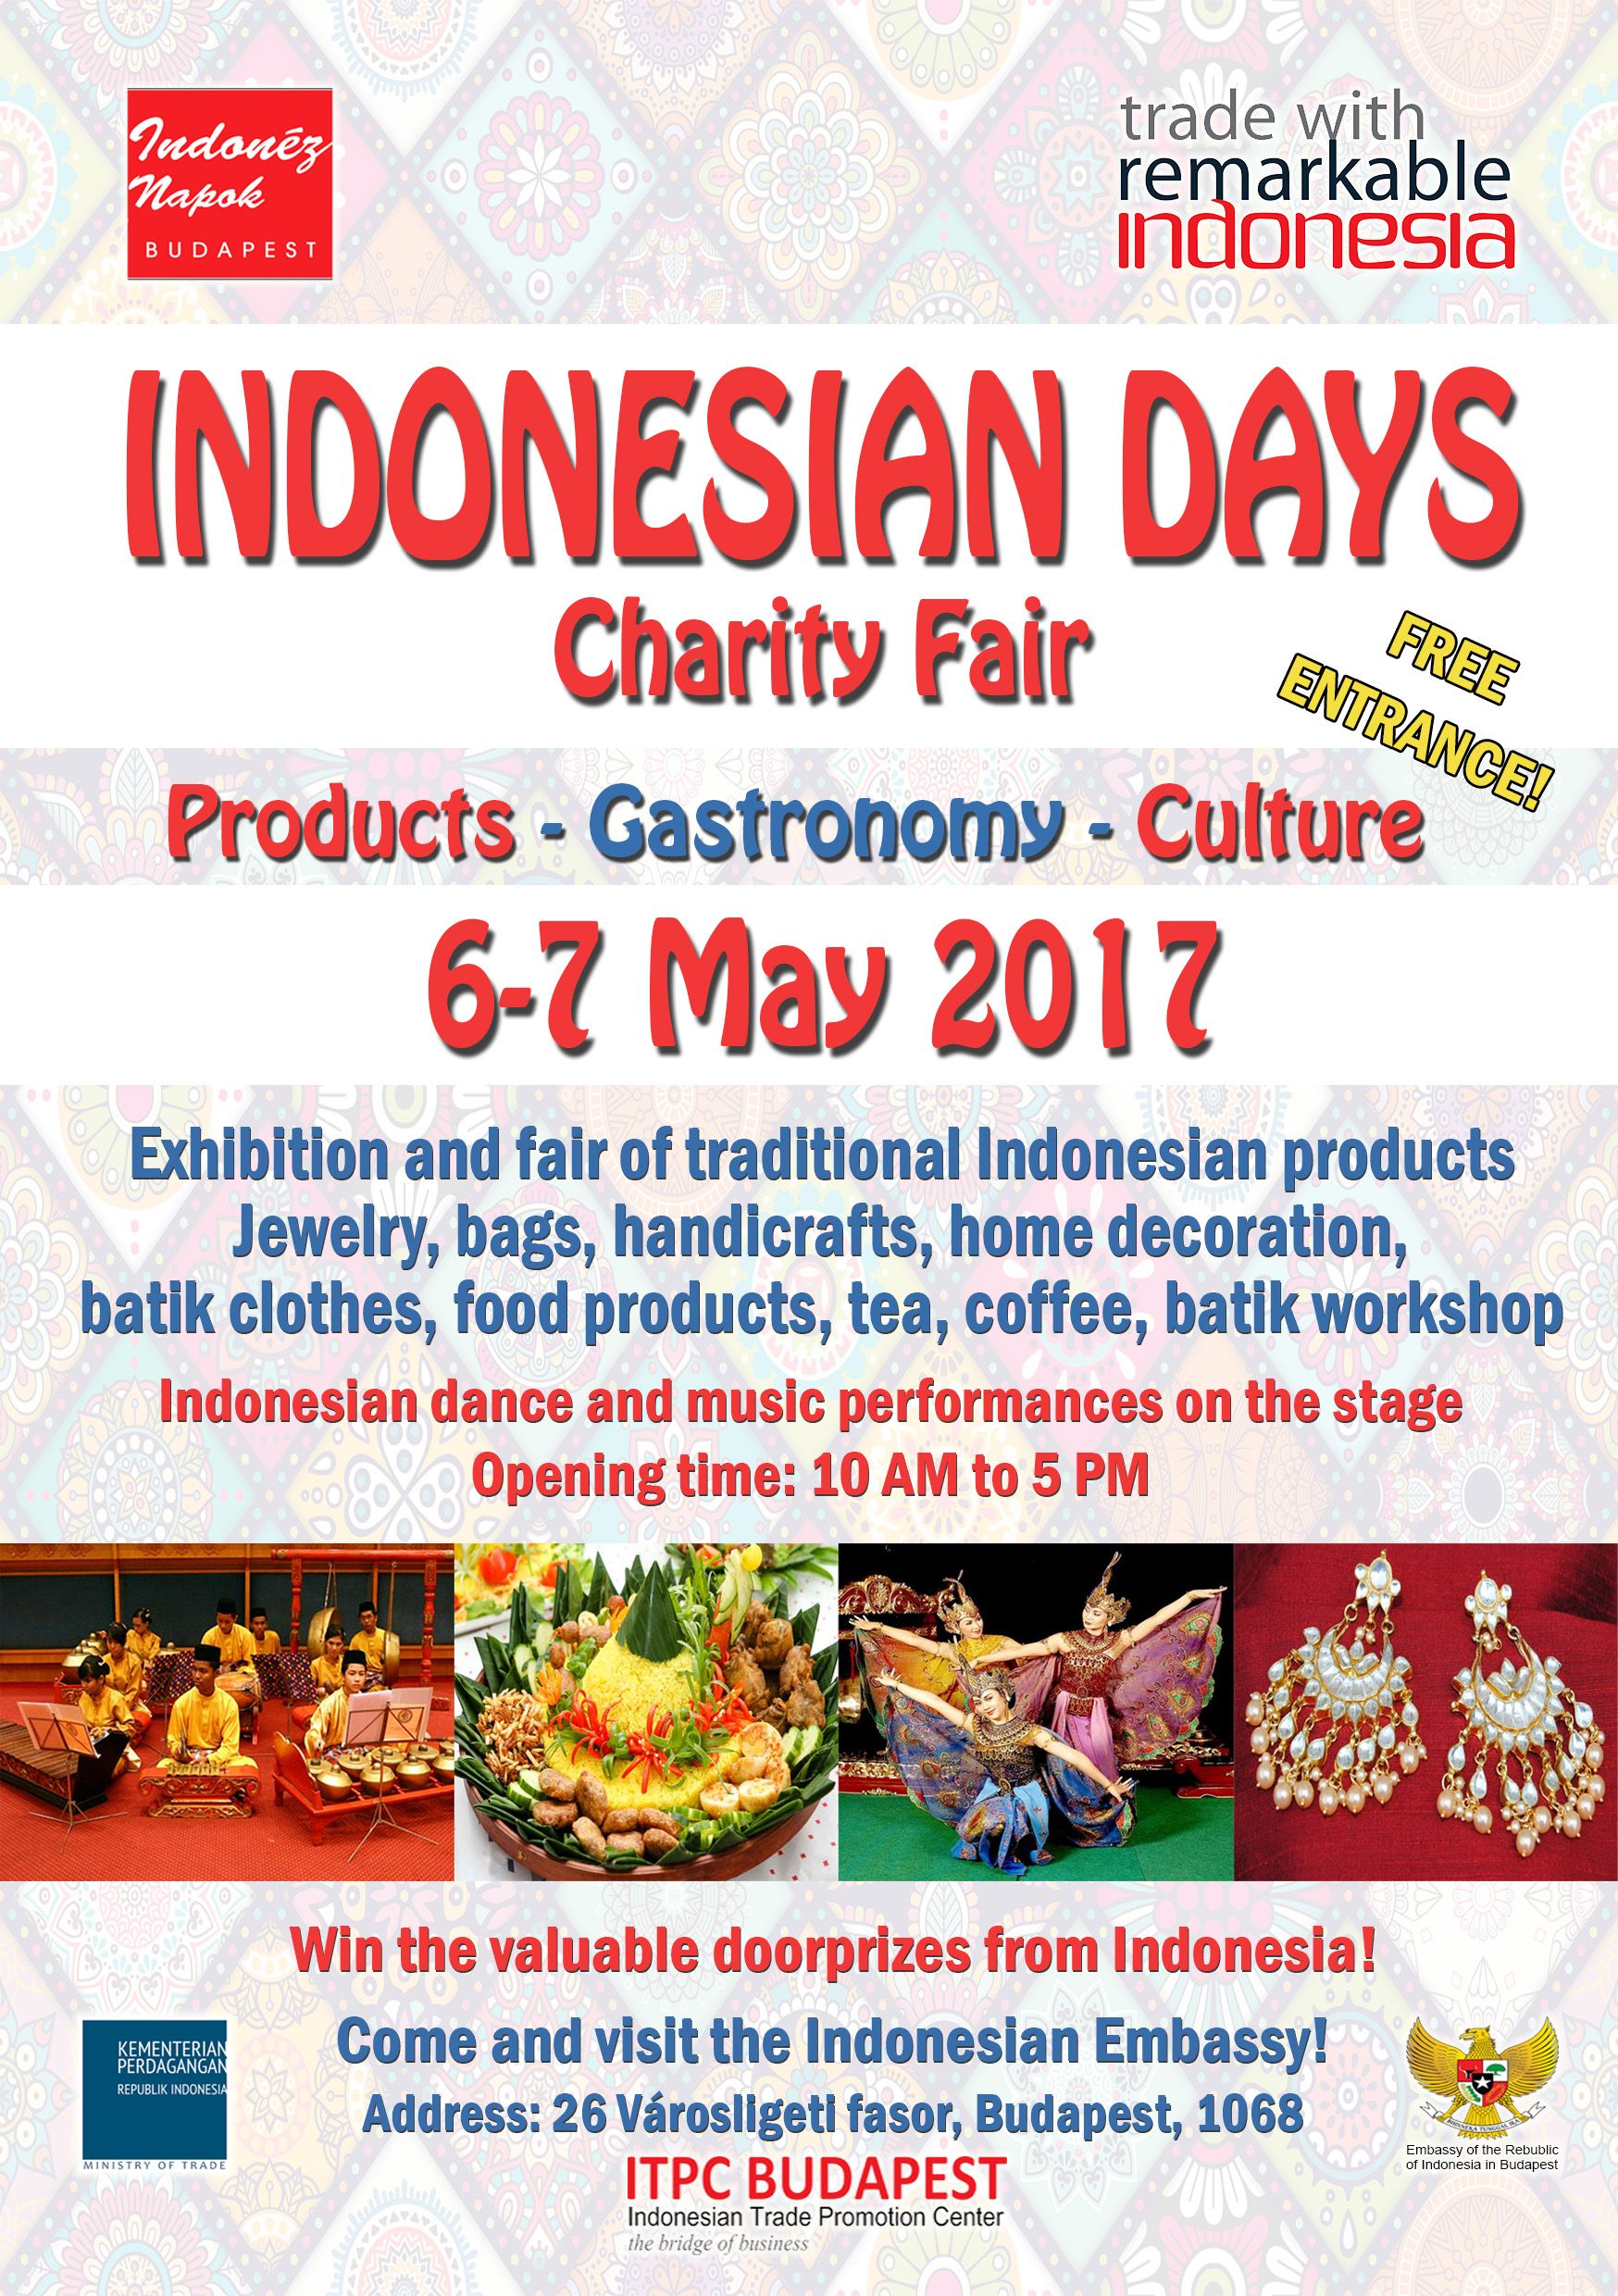 INDONESIAN DAYS AND CHARITY FAIR 2017